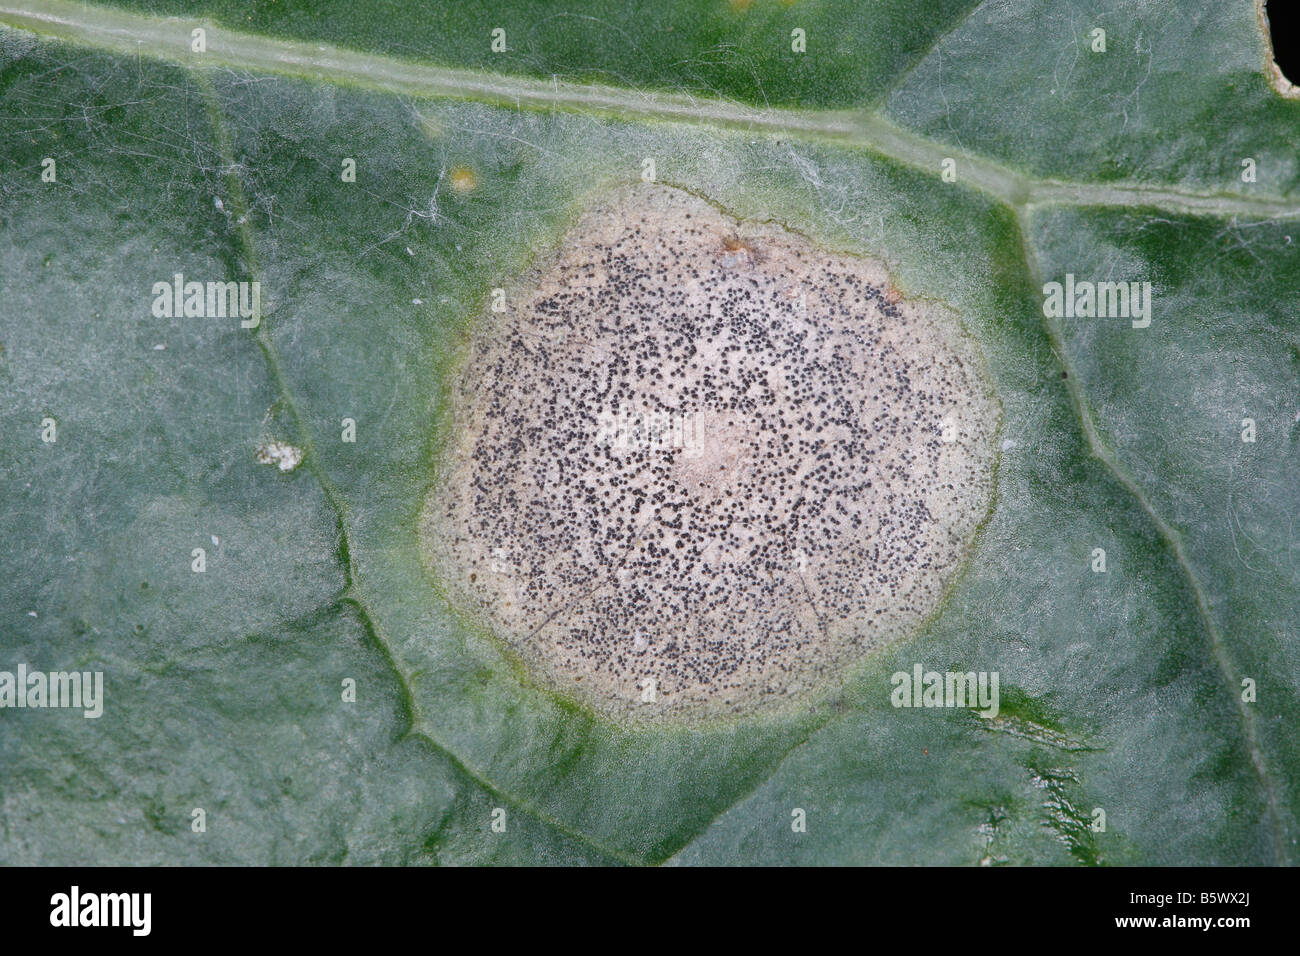 BACTERIAL RING SPOT mycosphaerella brassicicola ON UPPER SURFACE OF BRUSSELS SPROUT LEAF Stock Photo